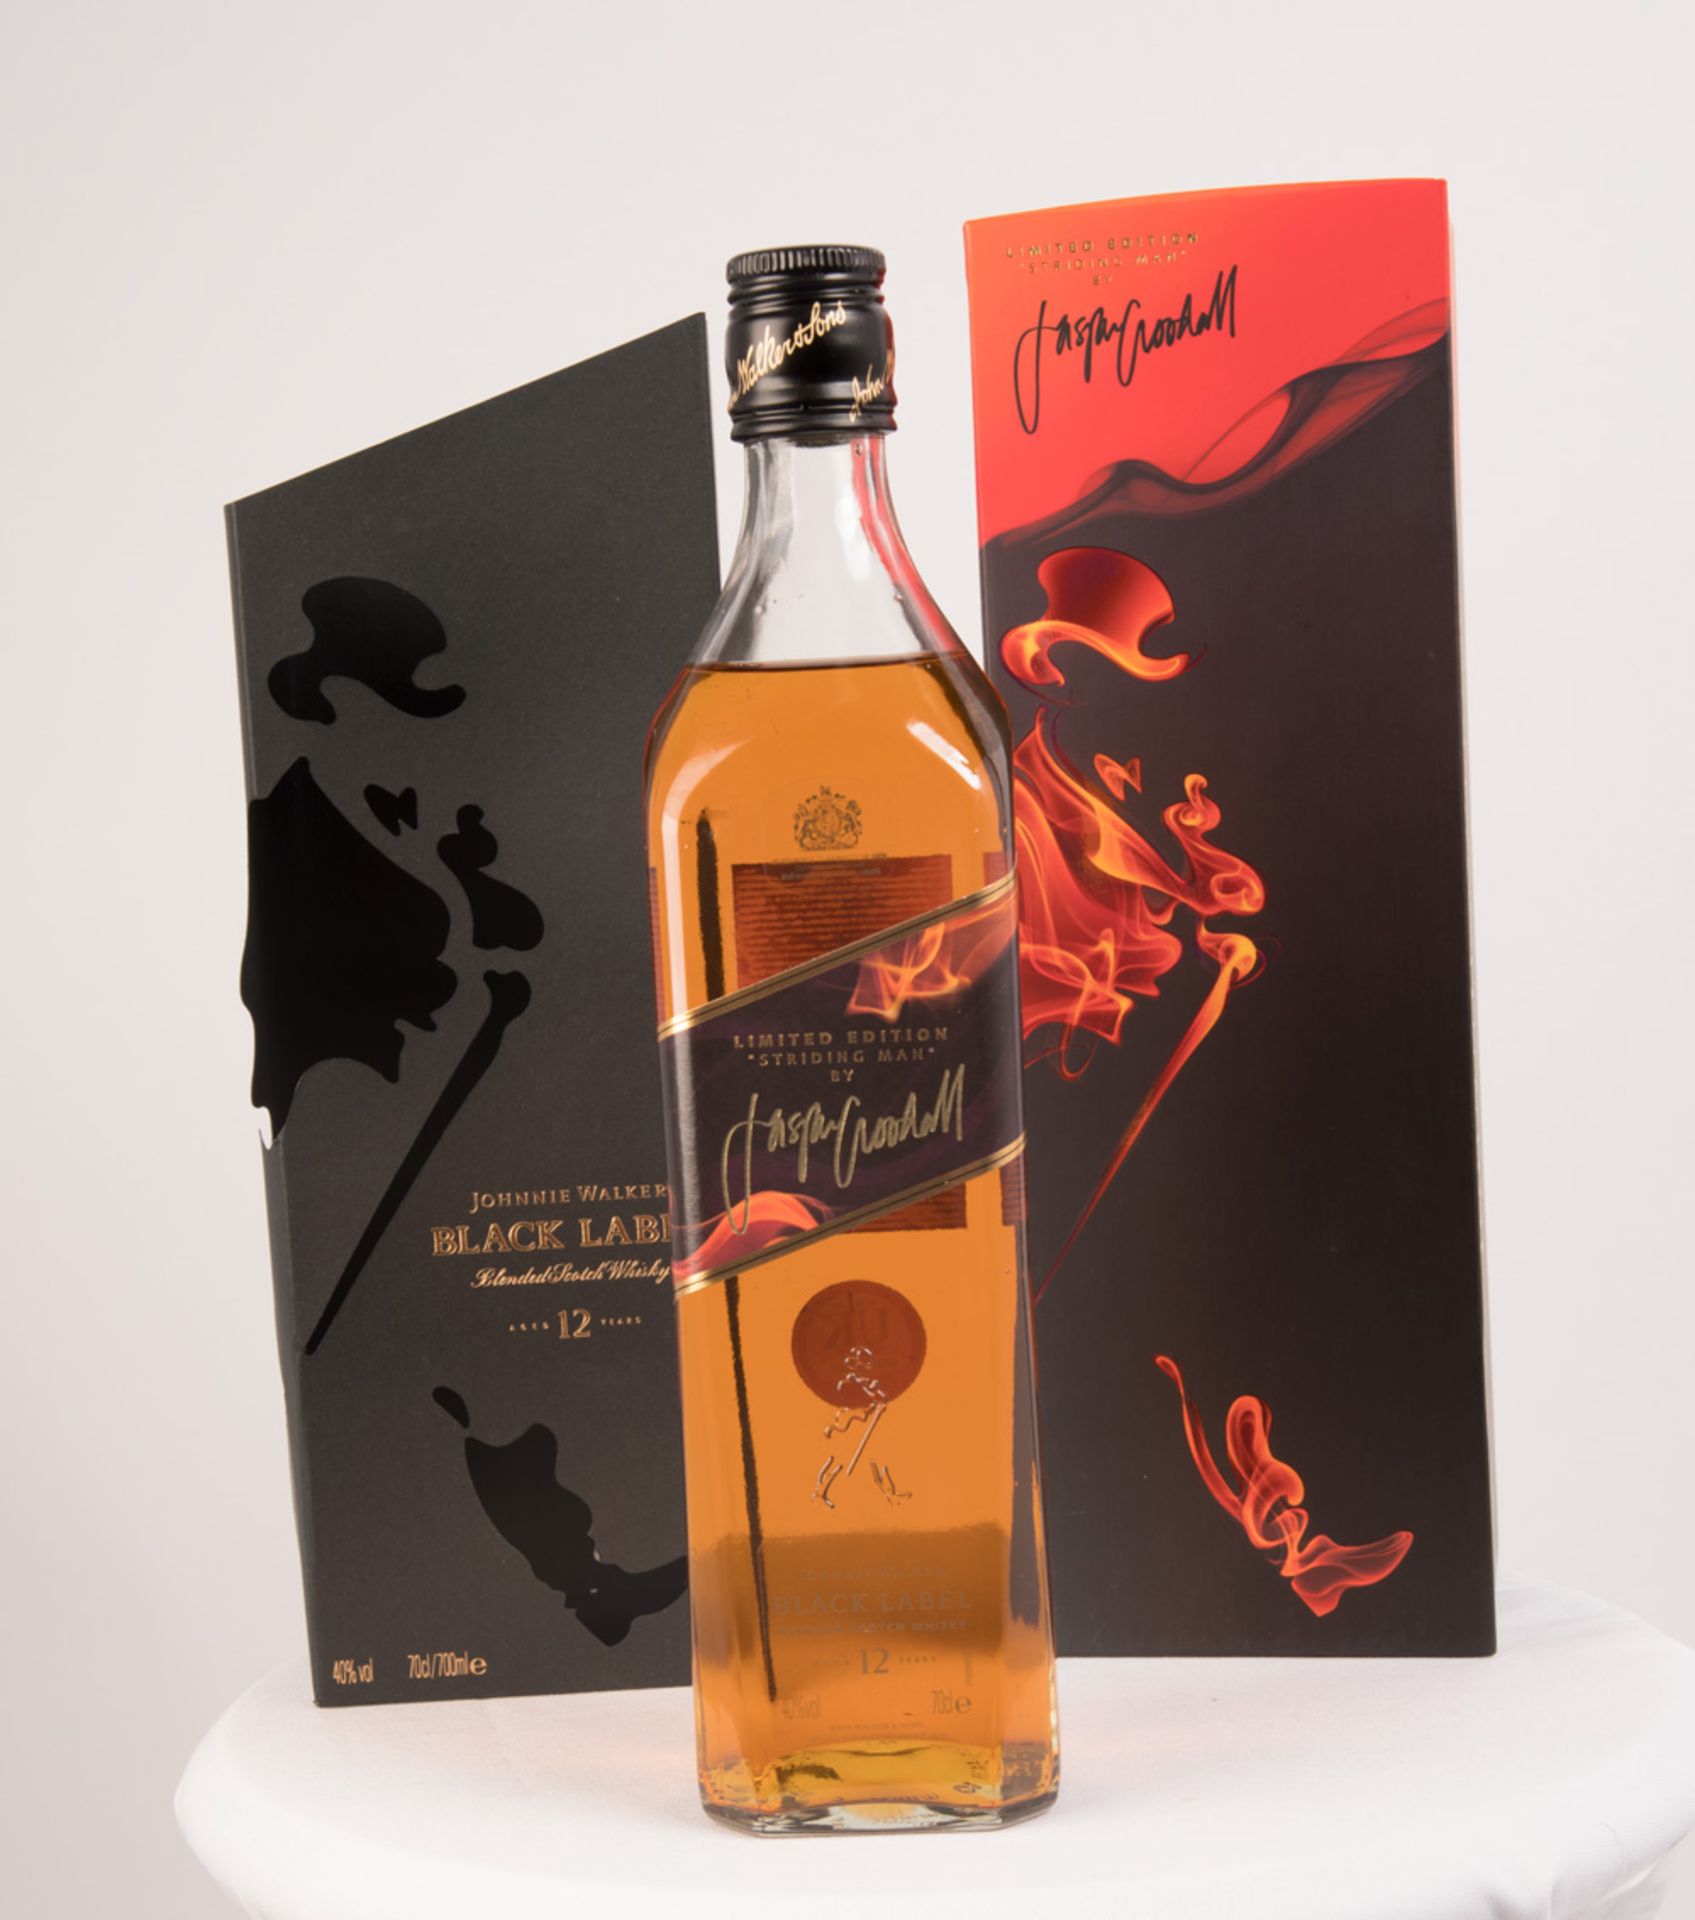 JOHNNIE WALKER 12YO LIMITED EDITION STRIDING MAN BY JASPER GOODALL Blended Scotch Whisky. Limited